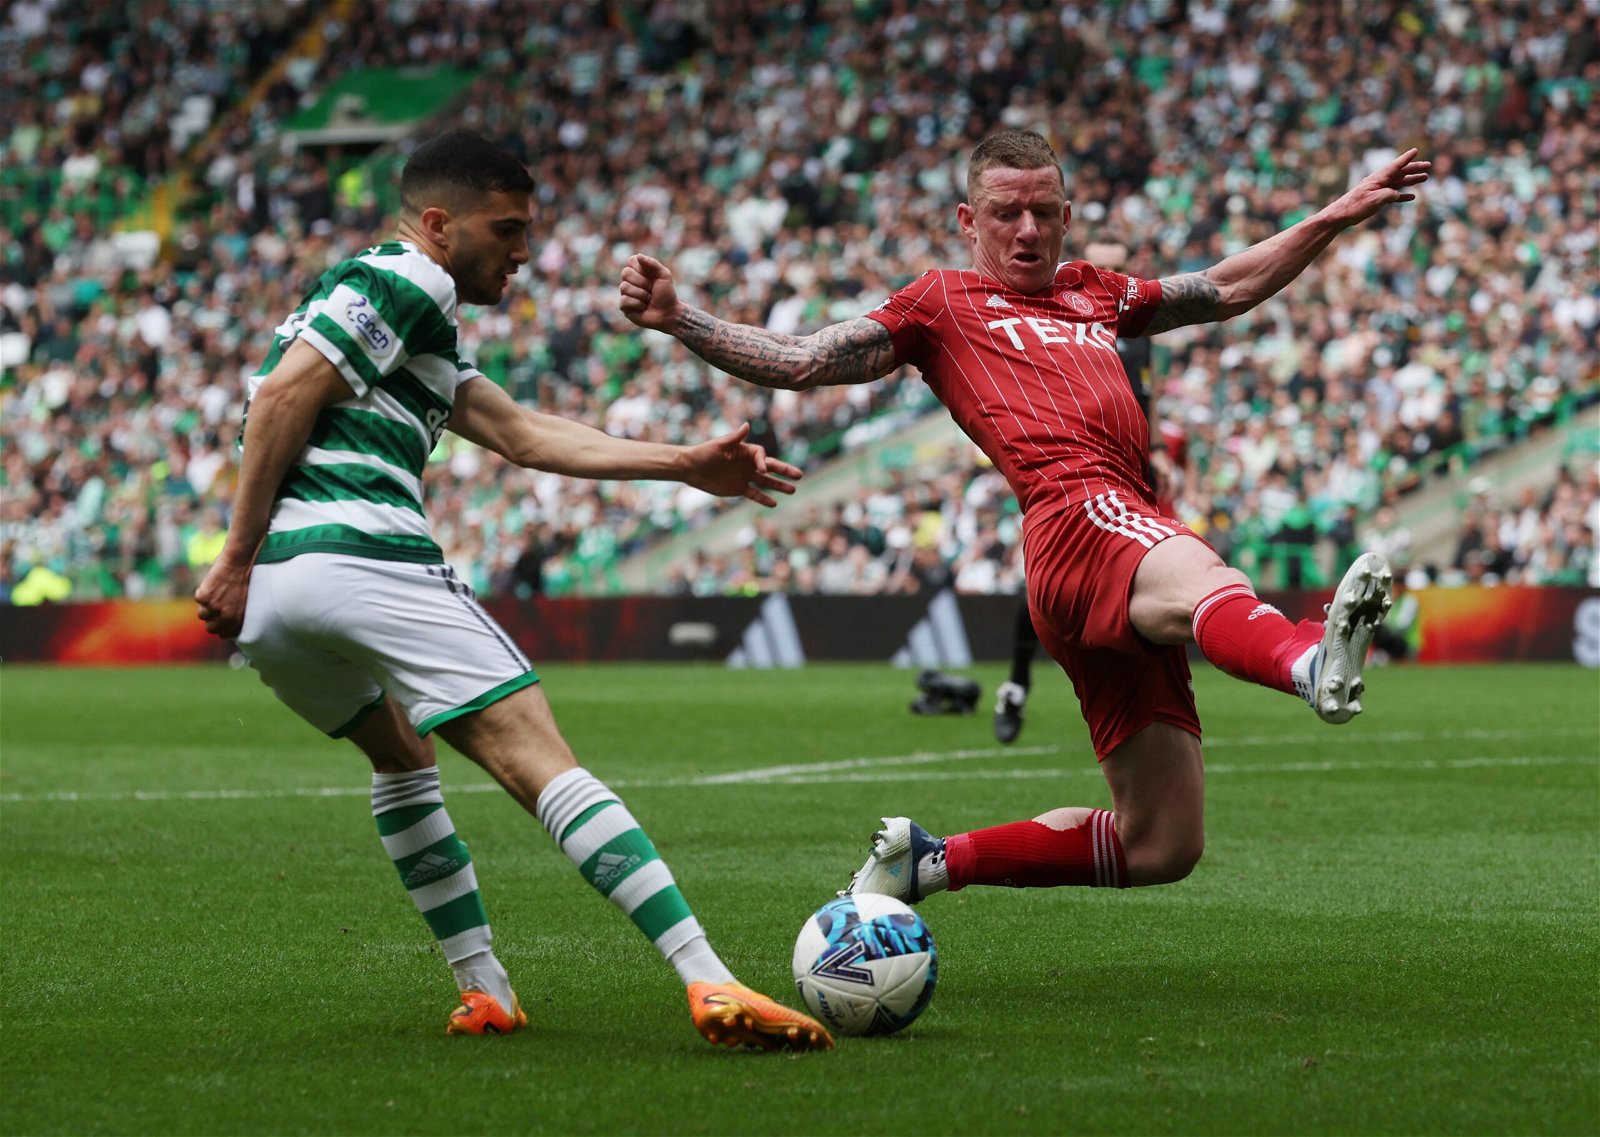 Aberdeen Vs Celtic Everything You Need To Know Latest Celtic News